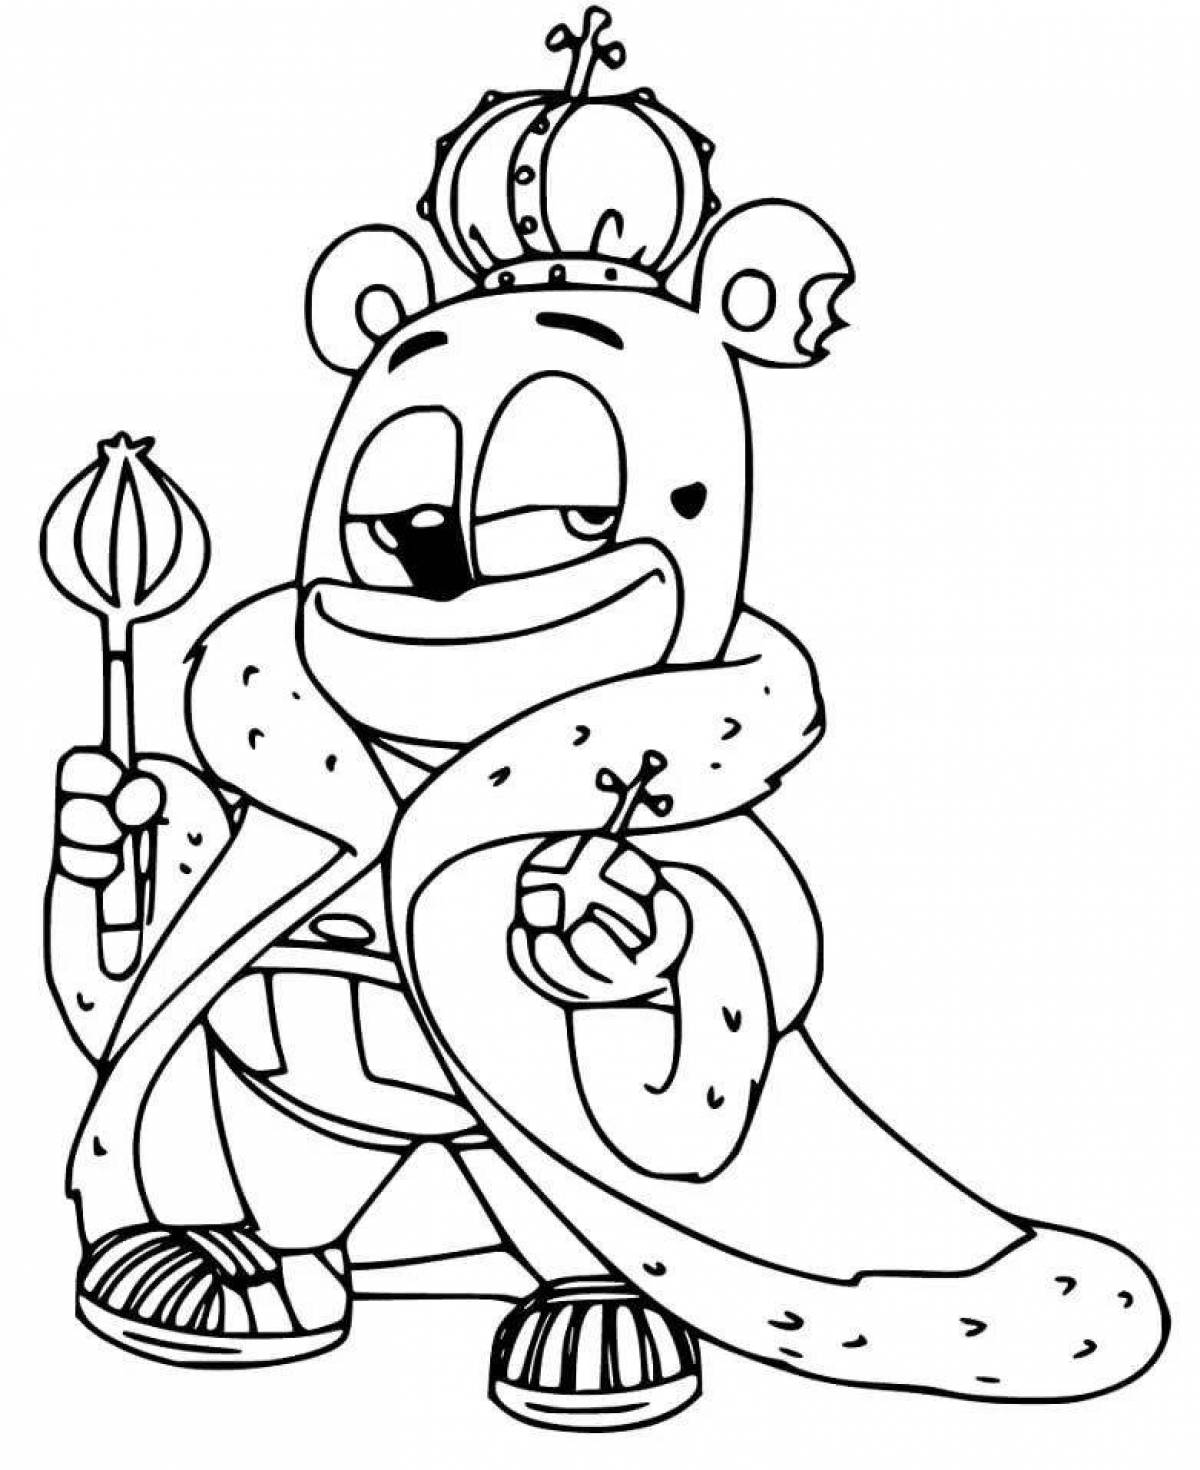 Sweet Humber coloring page